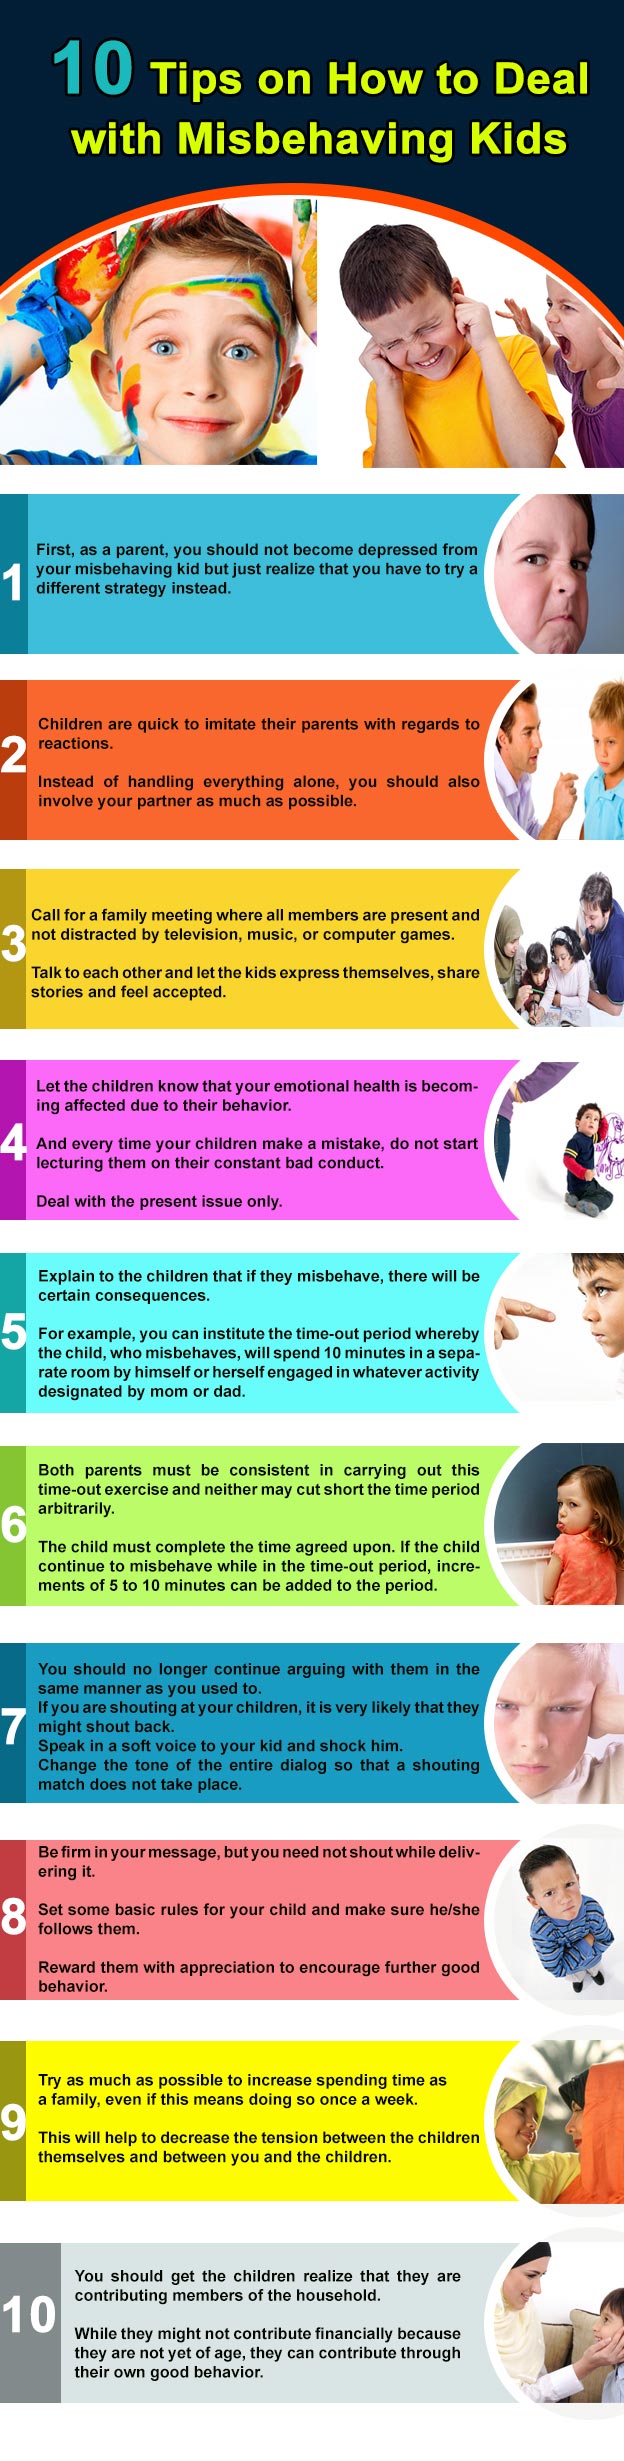 10 Tips on How To Deal with Misbehaving Kids